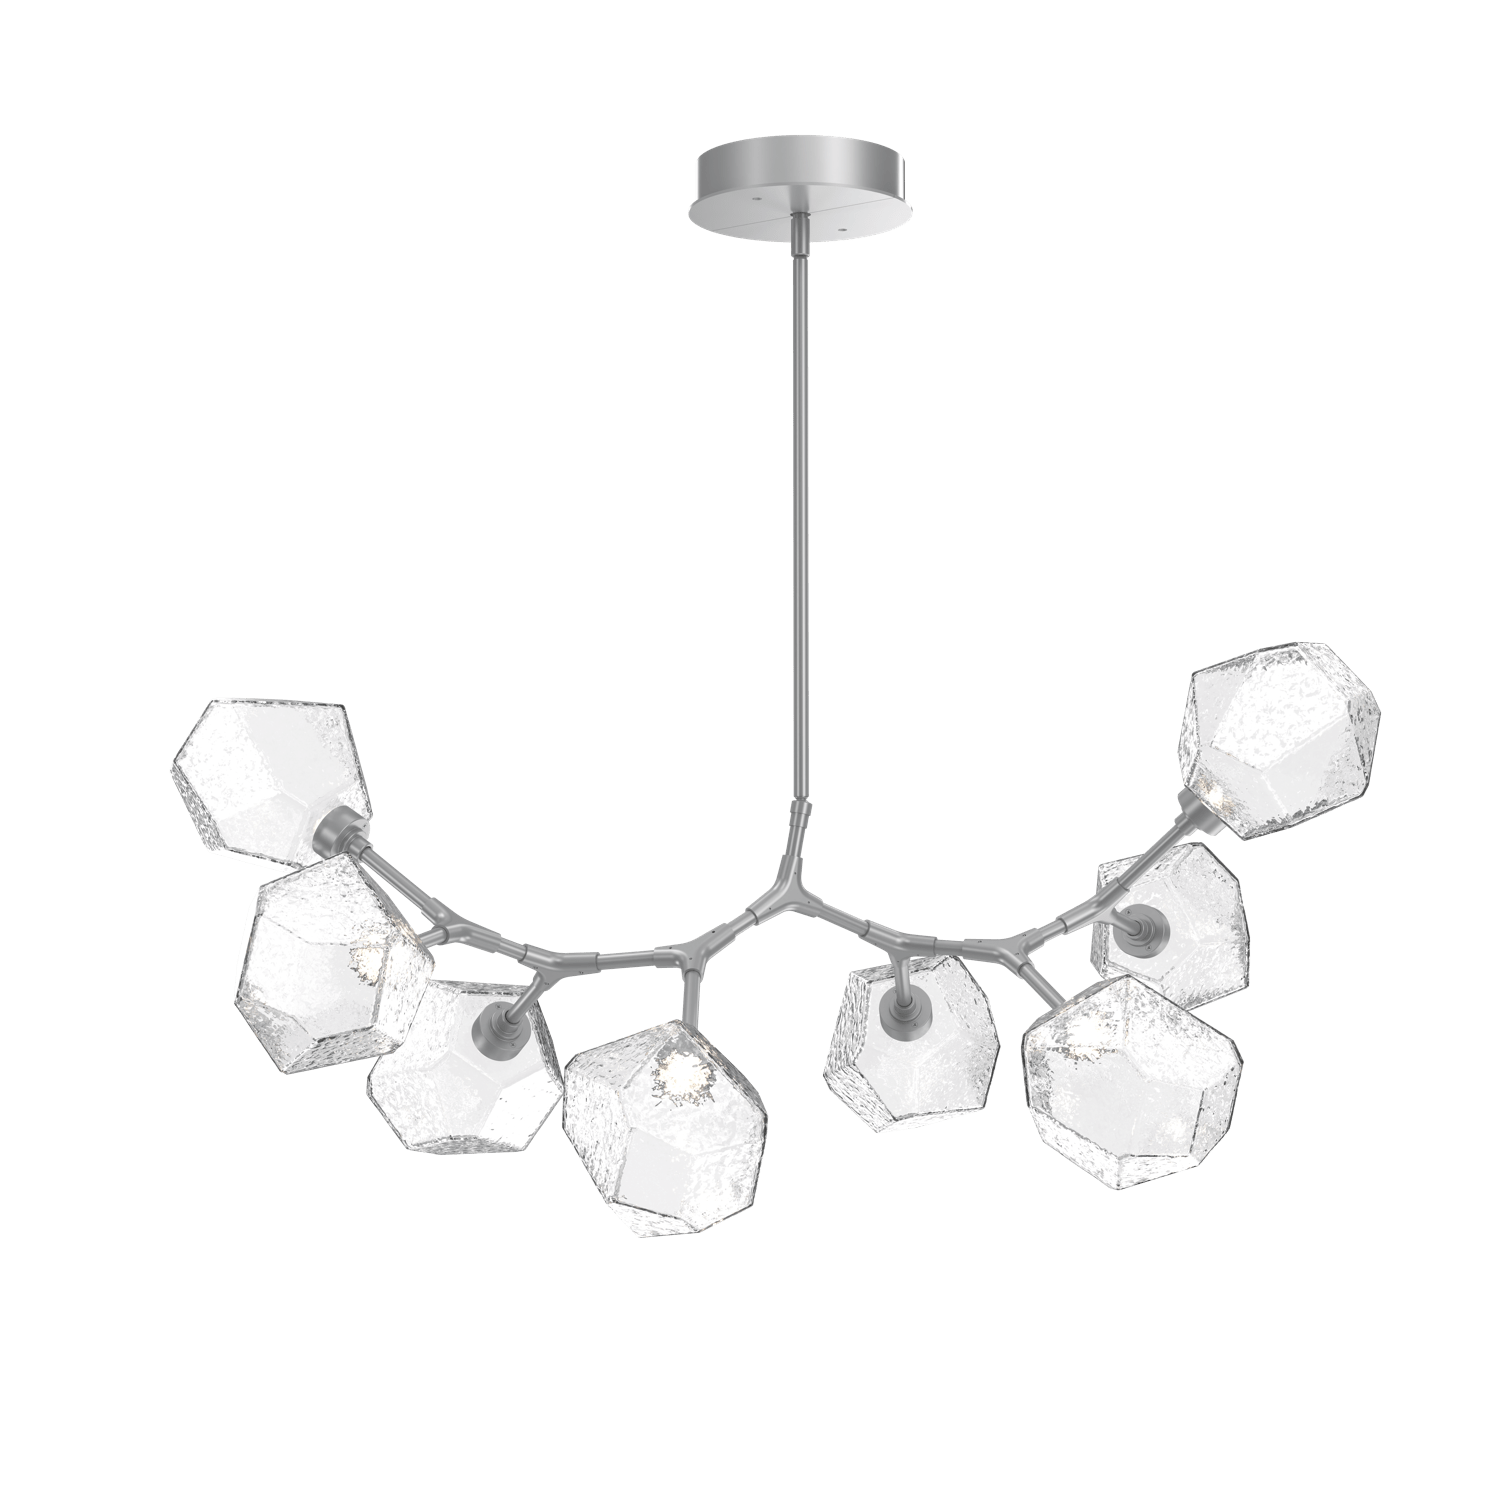 PLB0039-BB-CS-C-Hammerton-Studio-Gem-8-light-modern-branch-chandelier-with-classic-silver-finish-and-clear-blown-glass-shades-and-LED-lamping